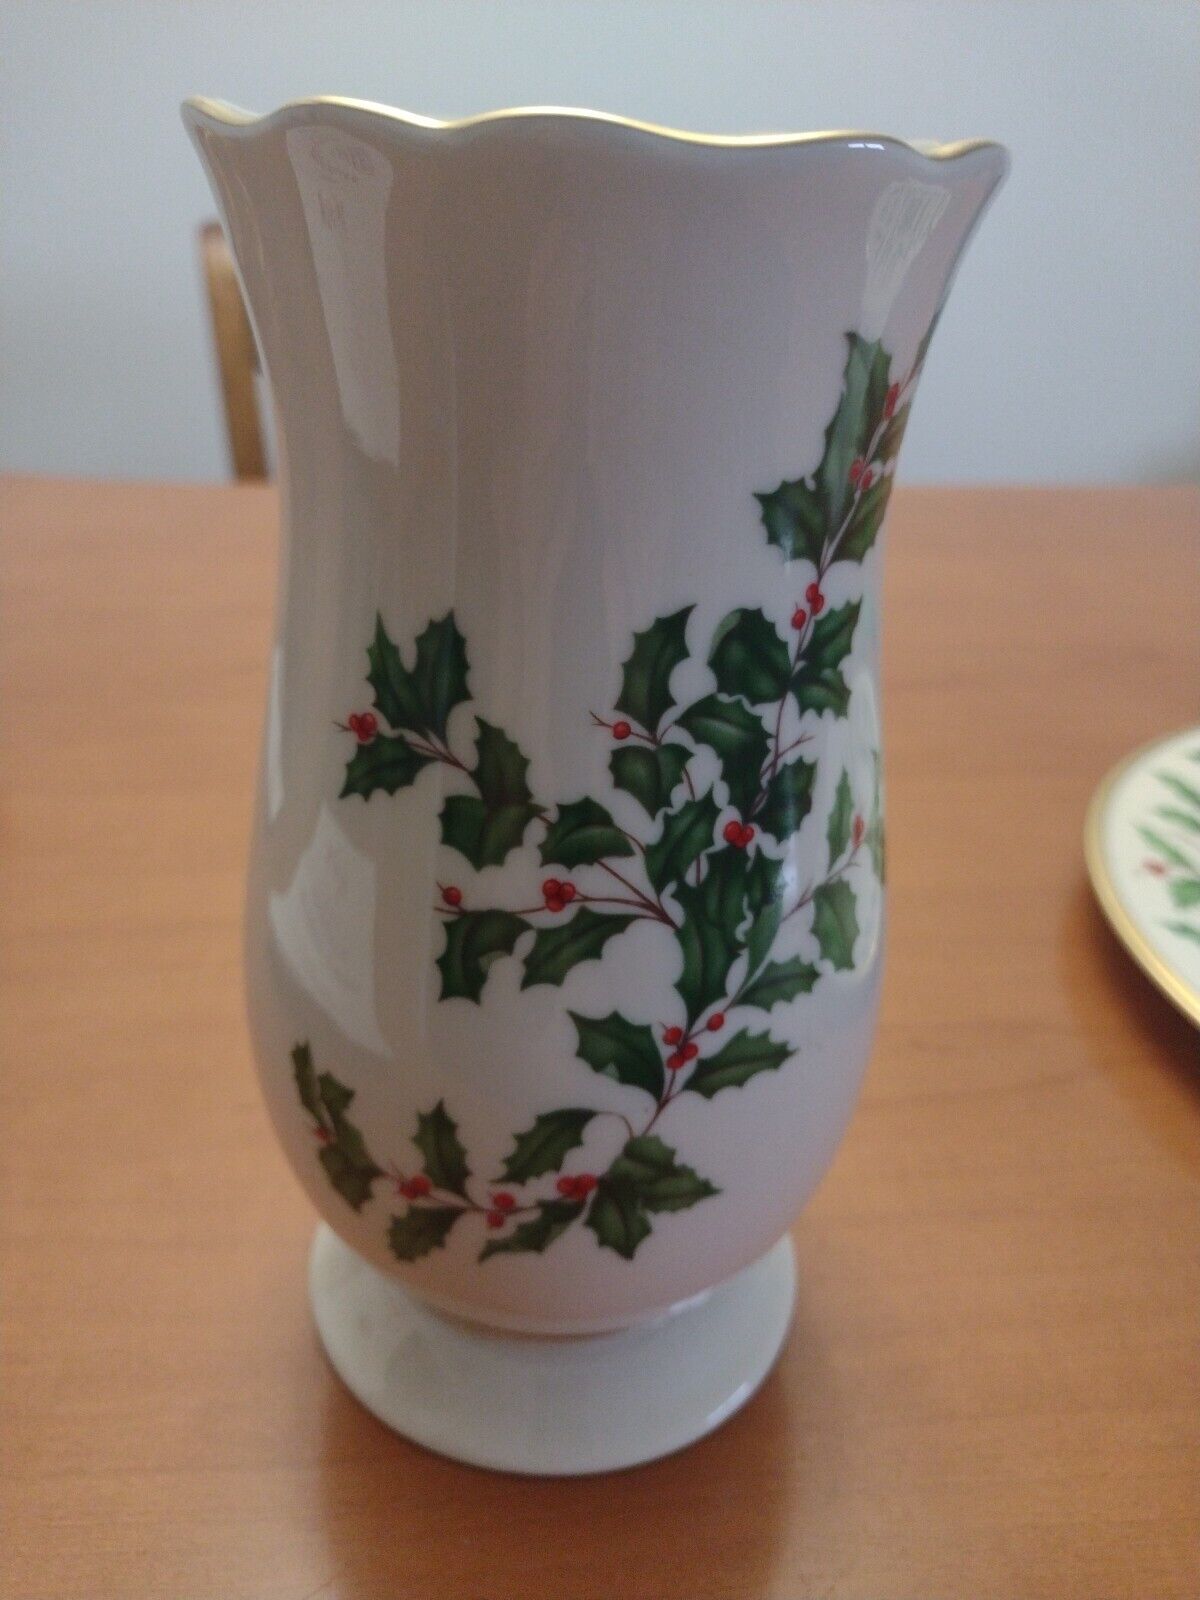 Lenox Holiday Scalloped Vase With Holly Leaves